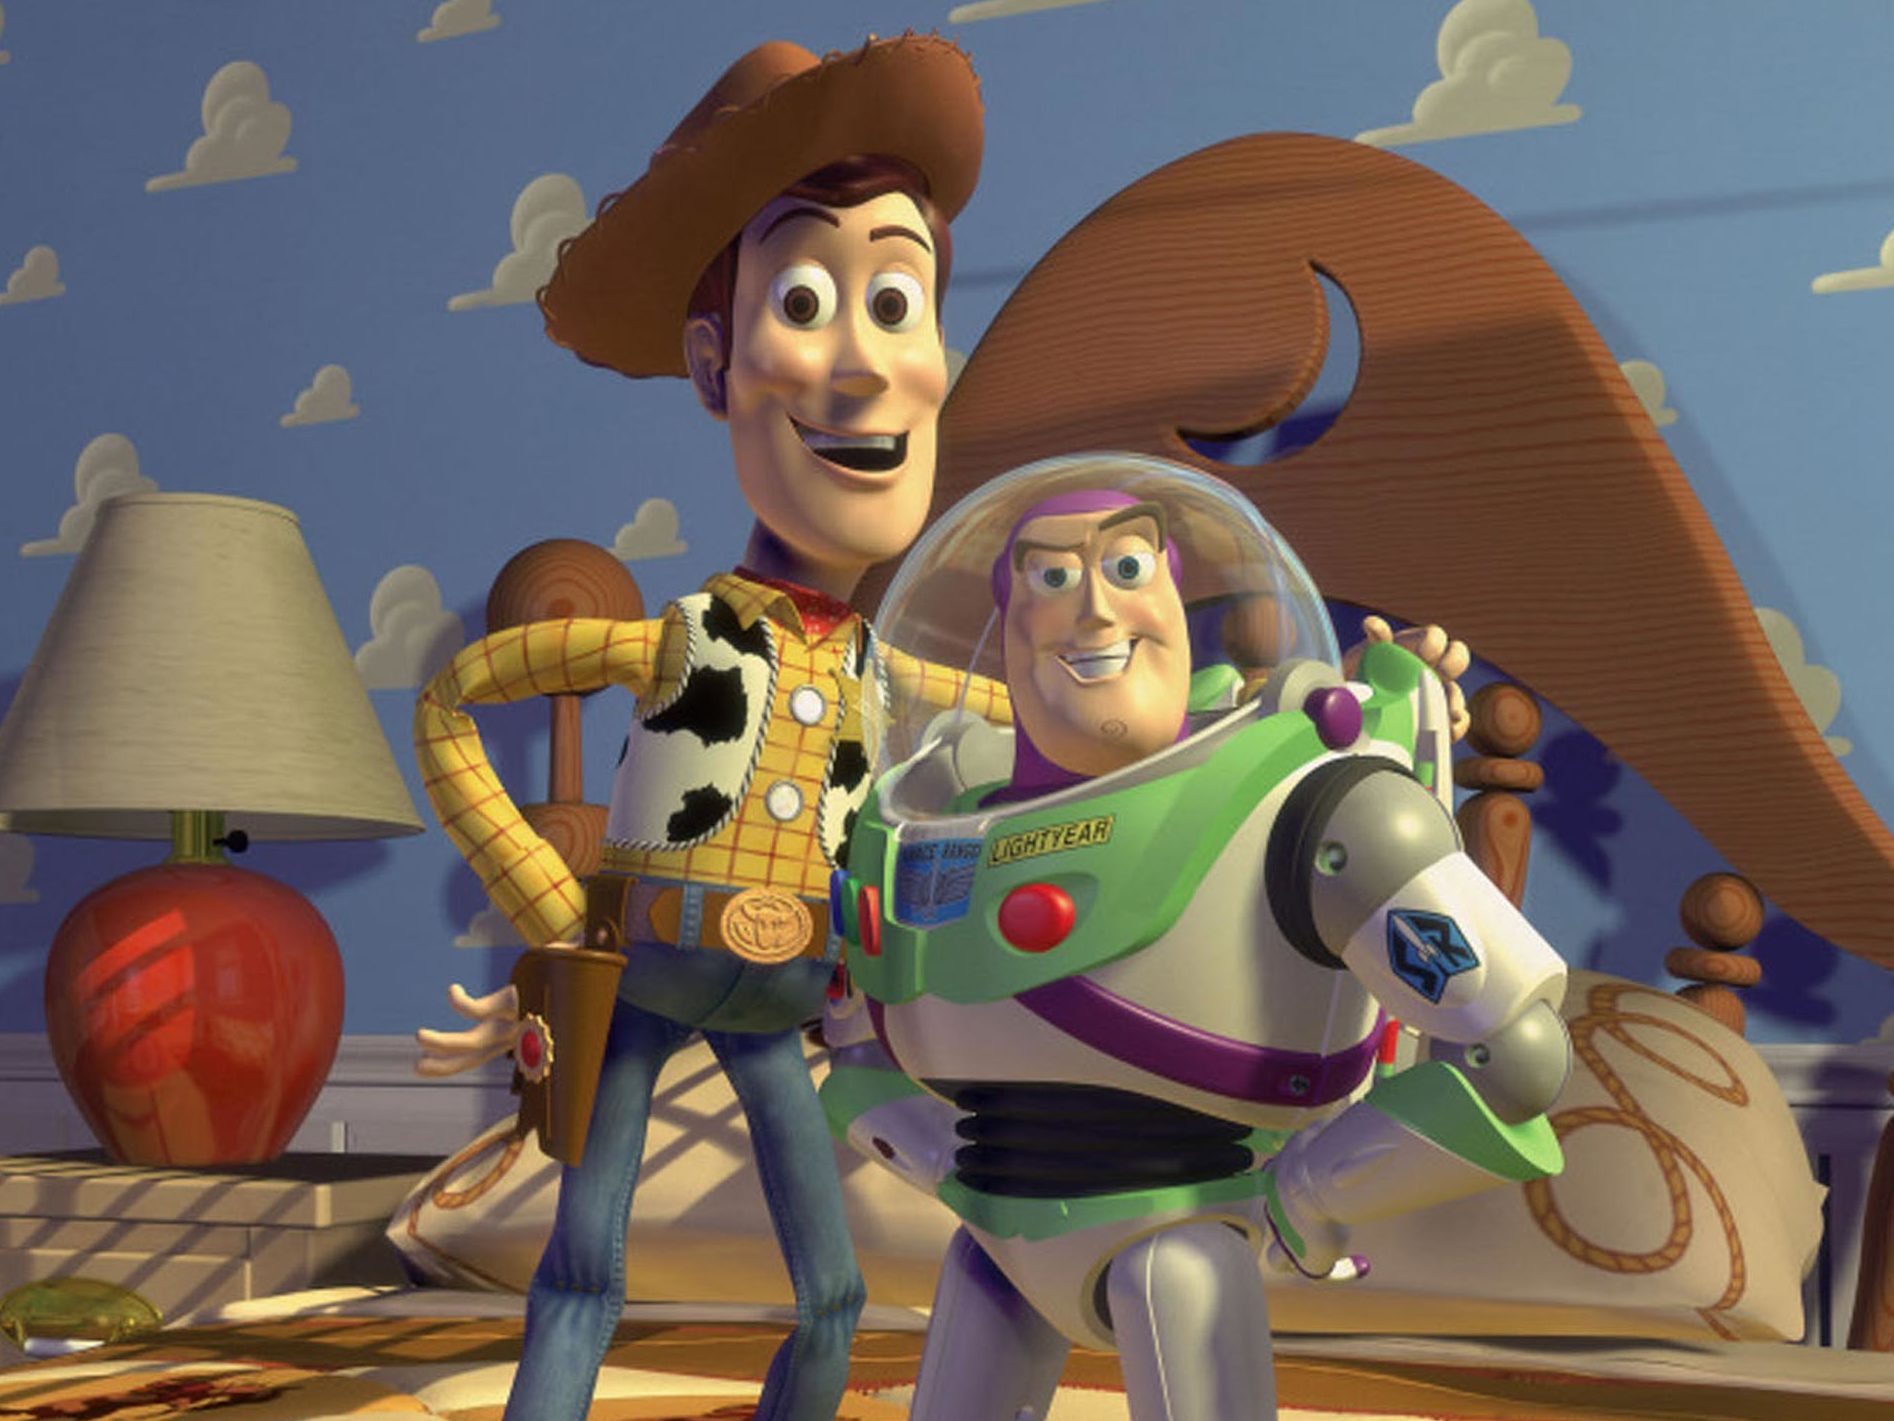 toy story 1 release